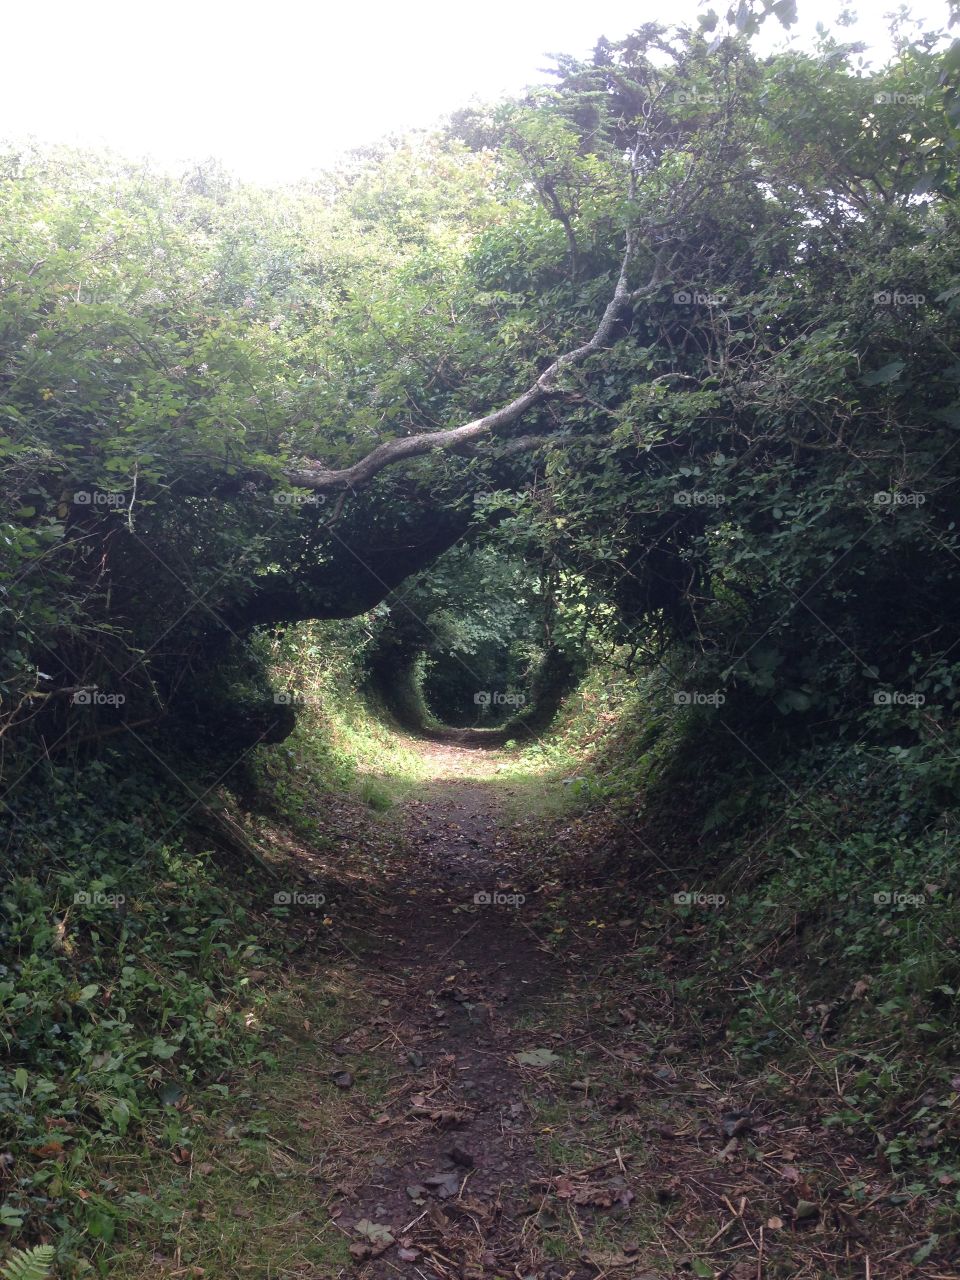 Looking down a hollow path. One of the many lovely foot paths in Cornwall.